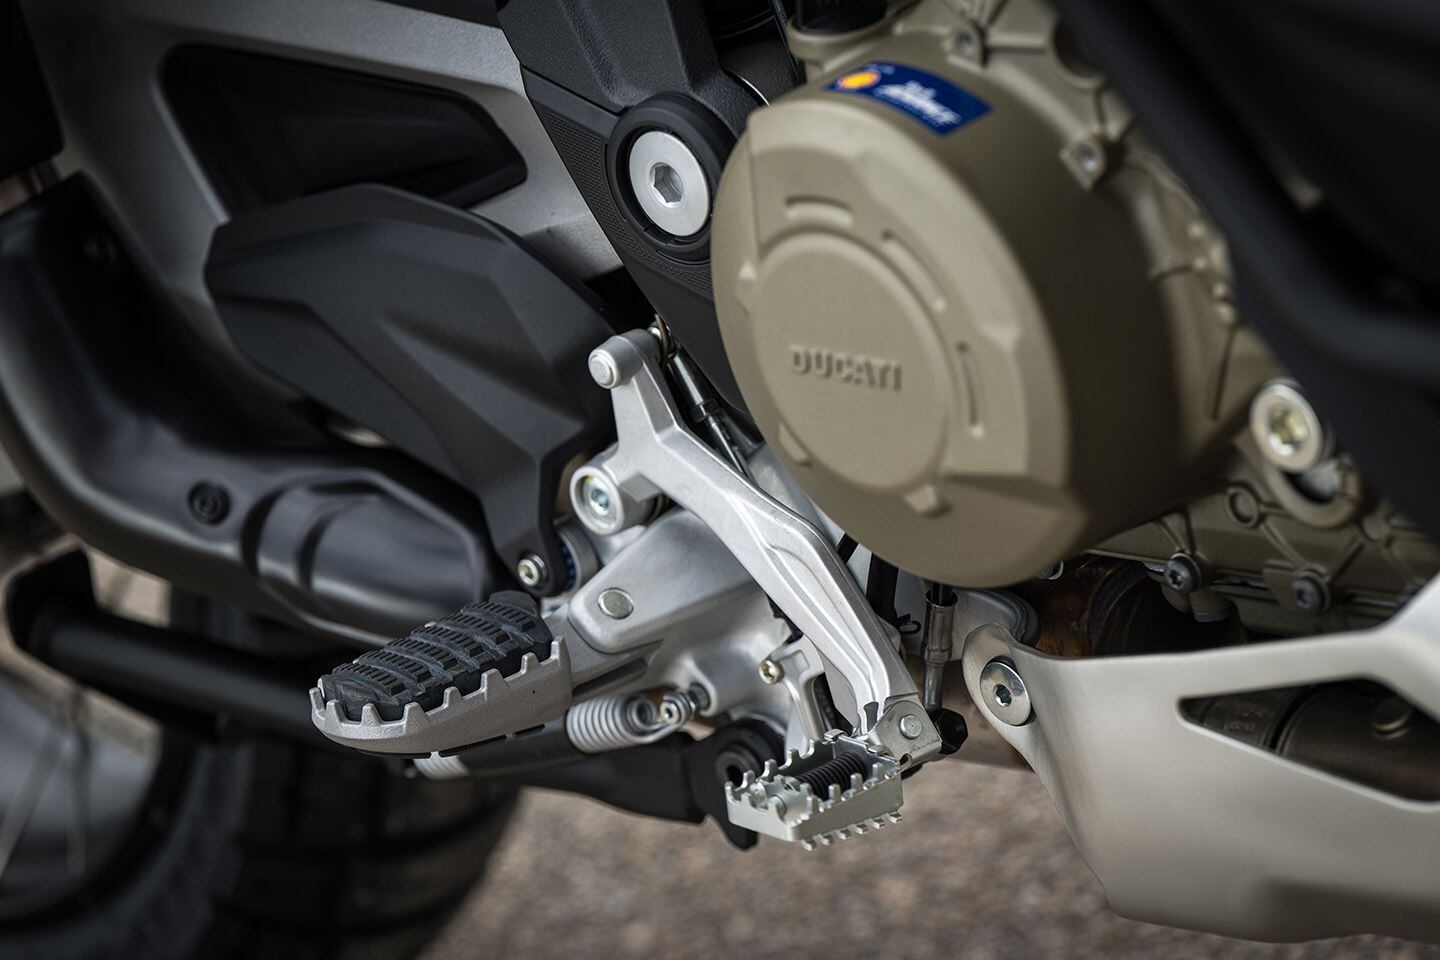 The rear brake pedal can be adjusted to two positions for better control off-road. The rubber footpeg inserts can easily be removed for better grip in wet or muddy conditions.